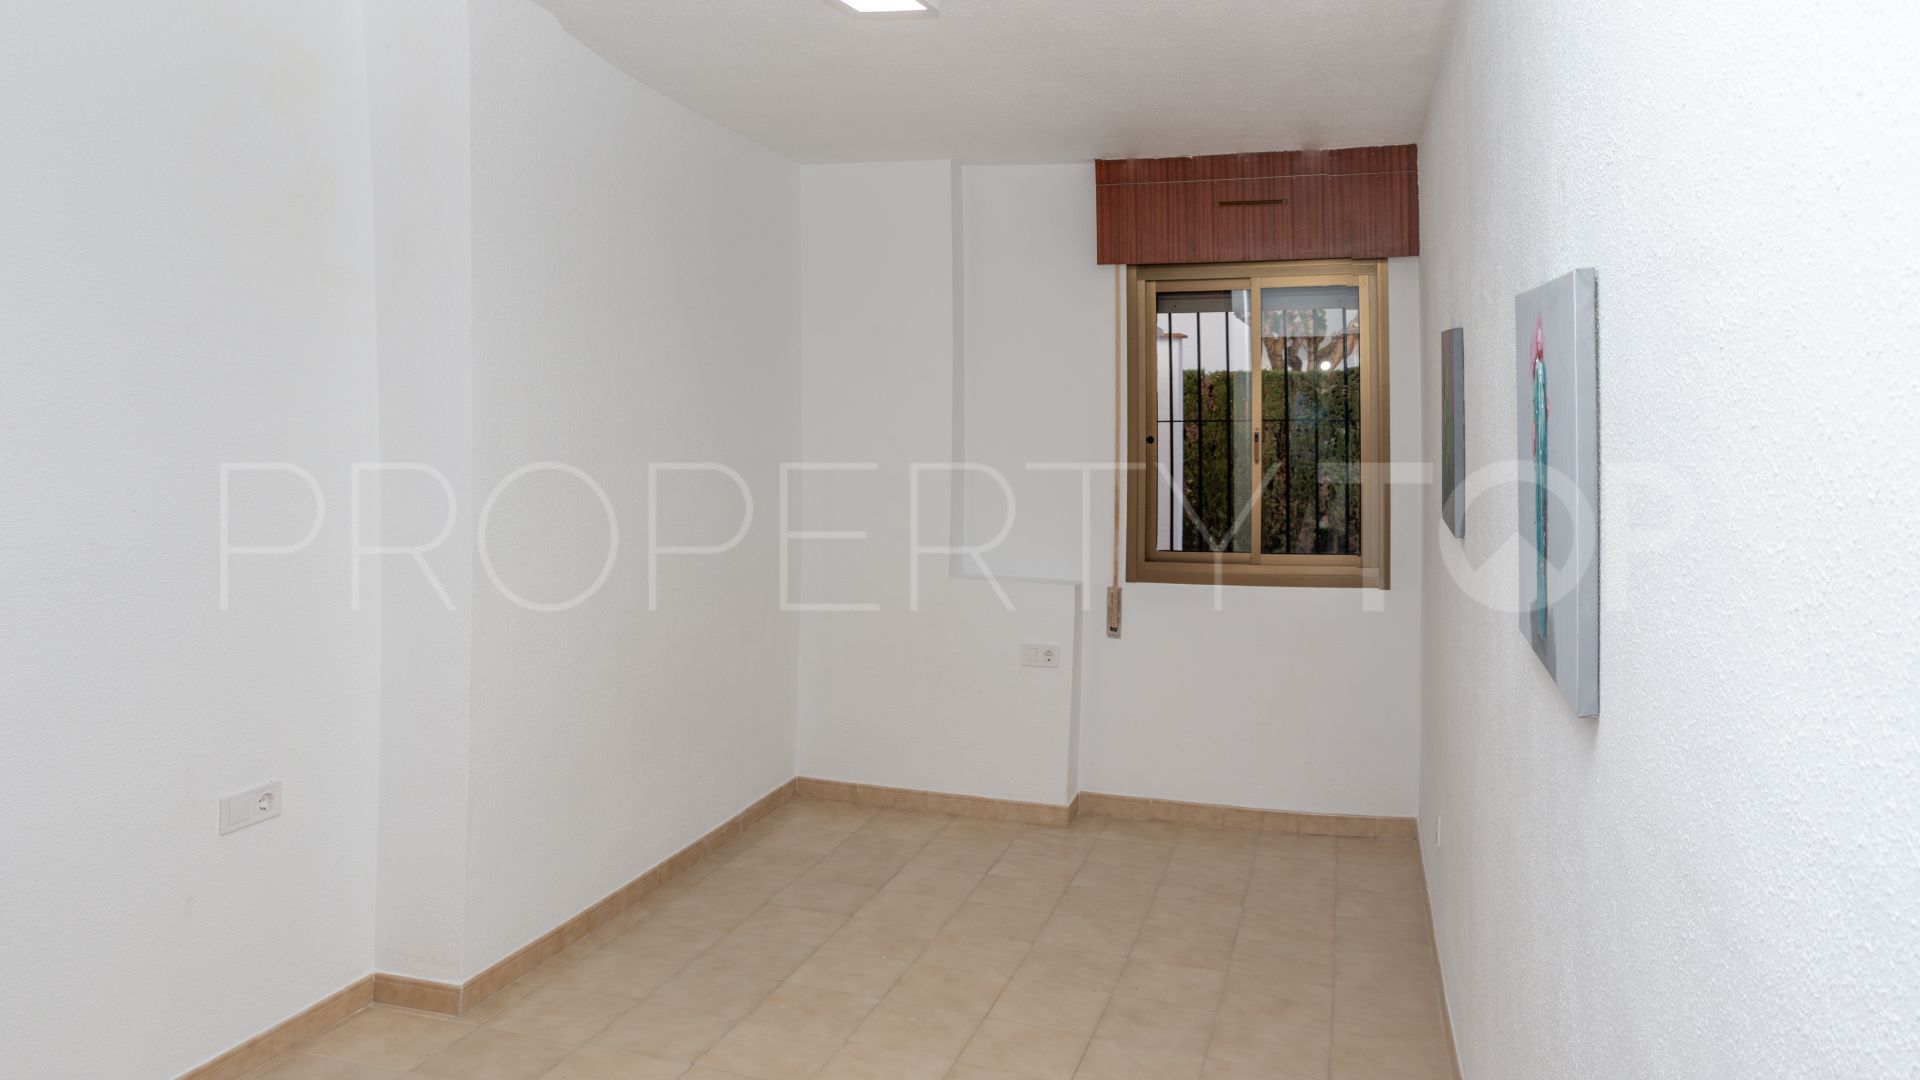 For sale Seghers ground floor apartment with 3 bedrooms